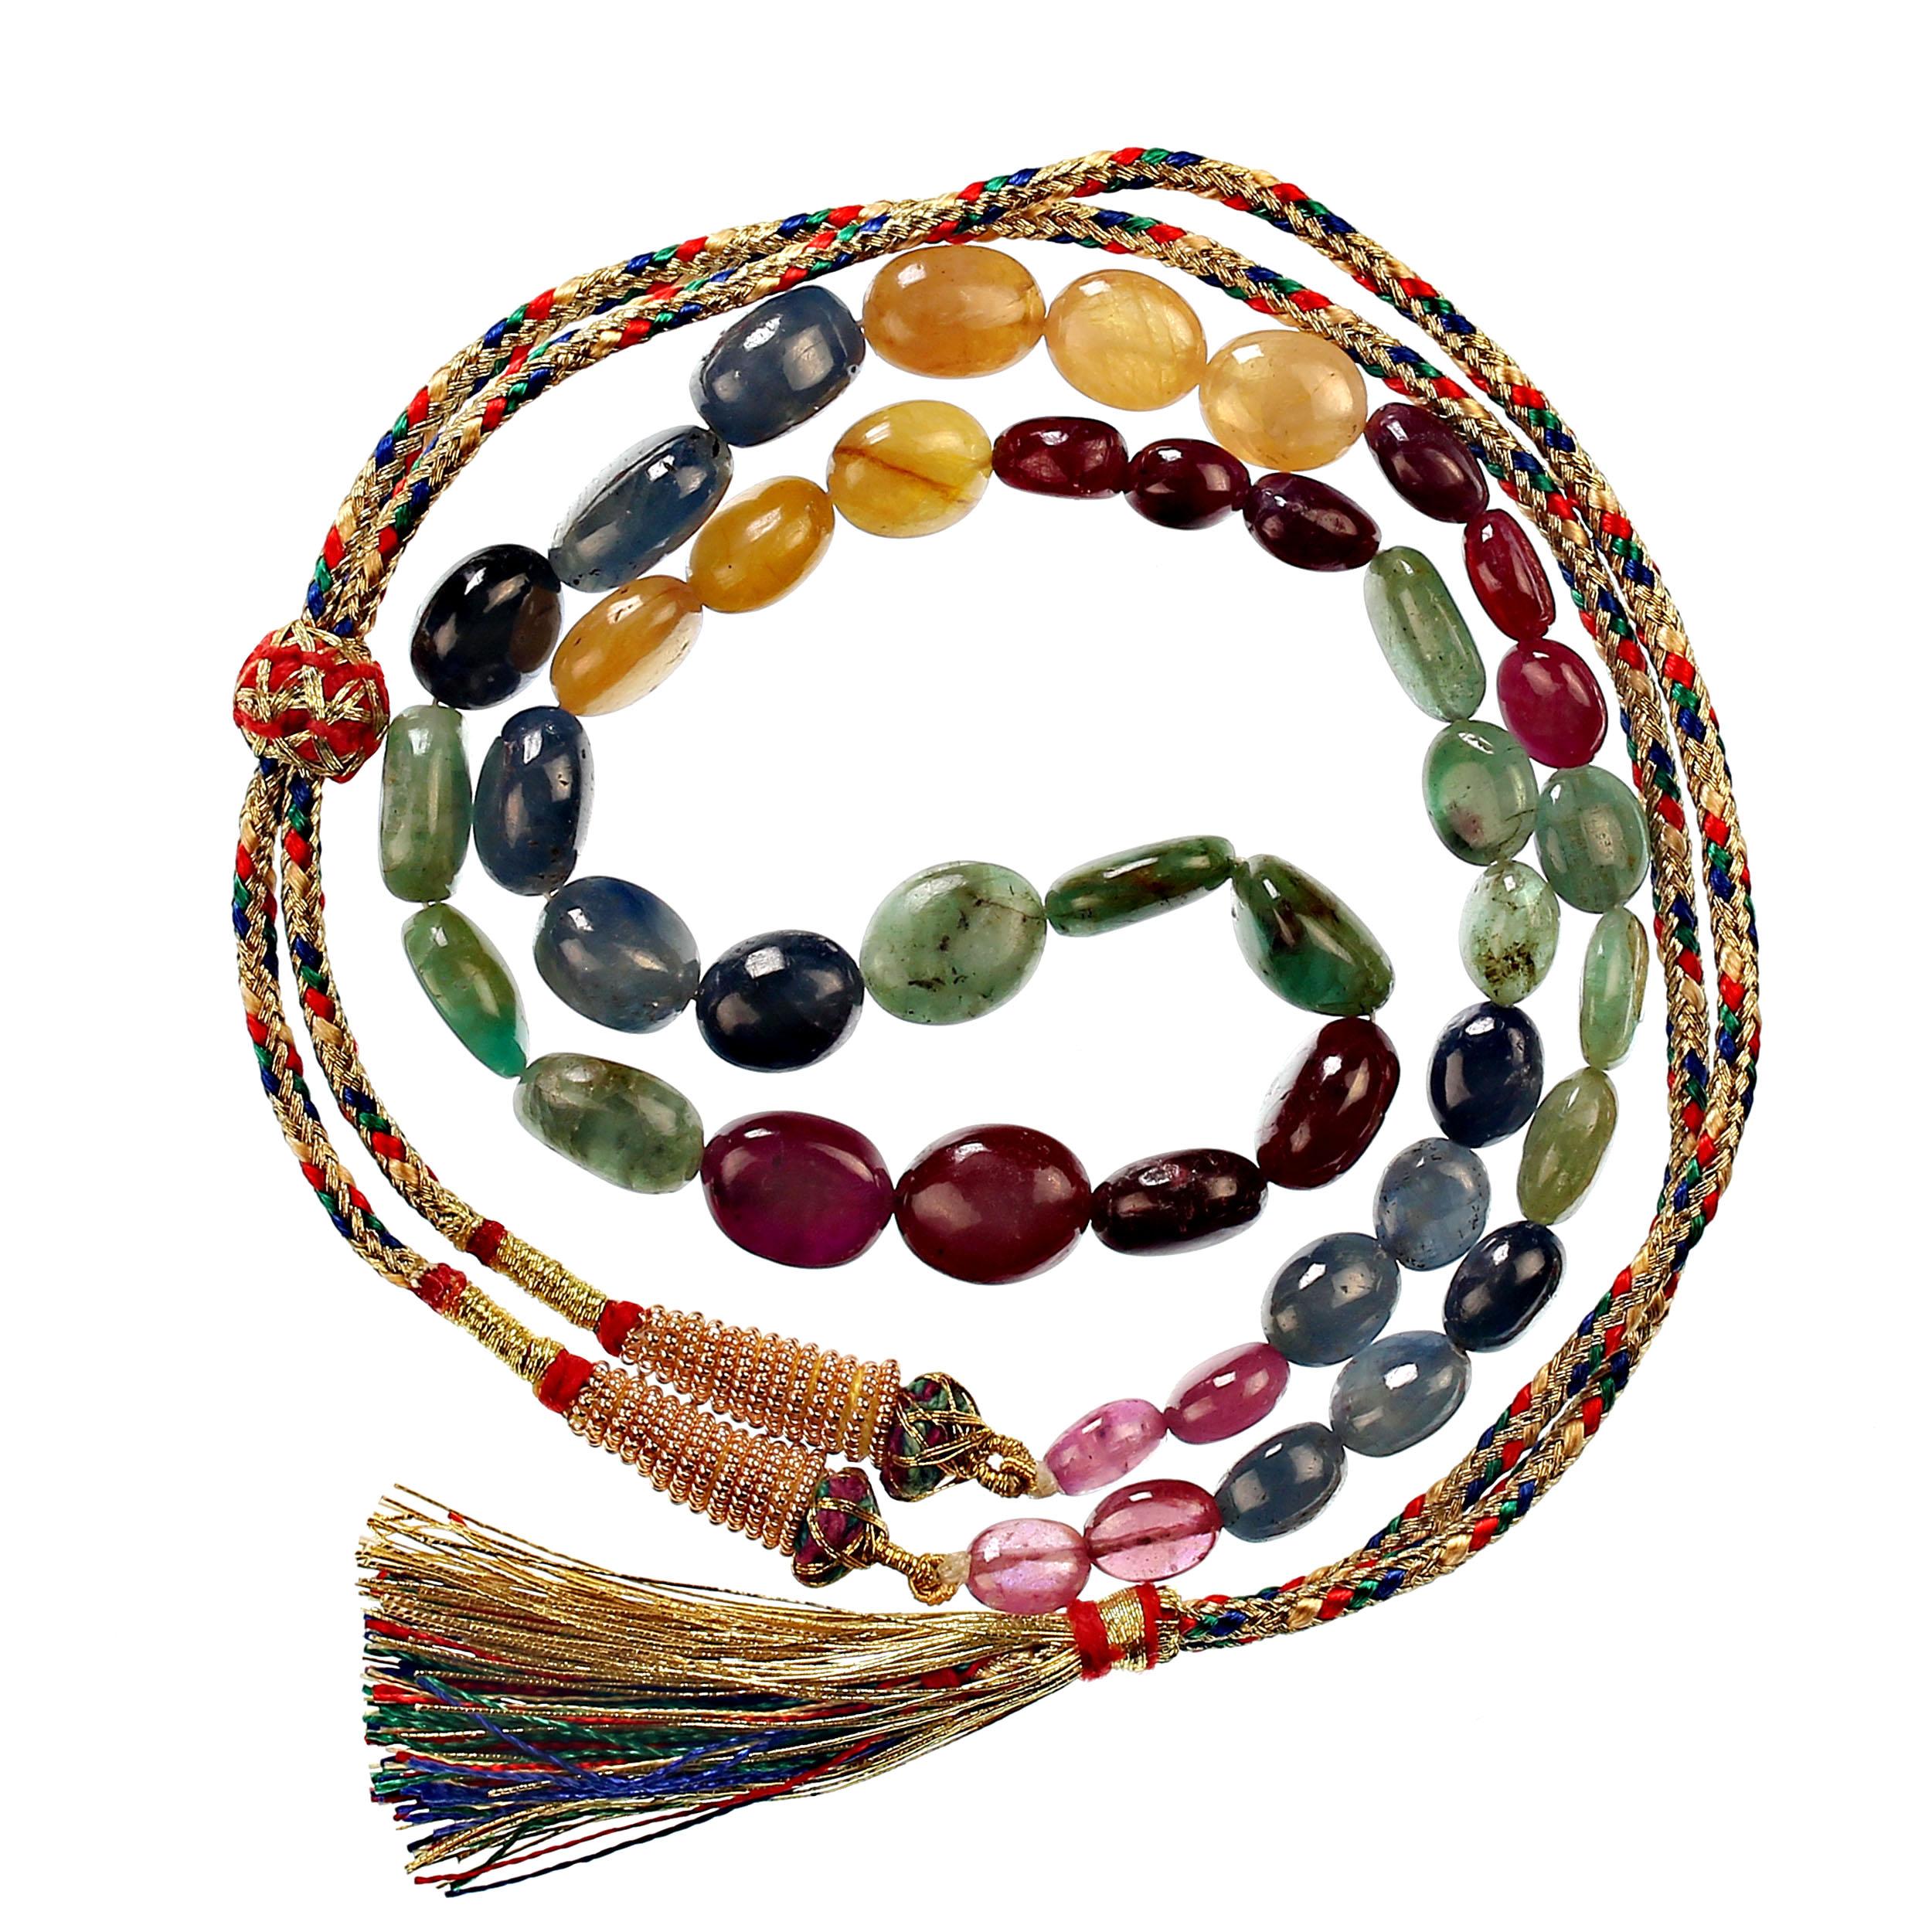 Women's or Men's AJD 19 Inch Multi Color Beaded Sapphire Necklace   Great Gift! For Sale